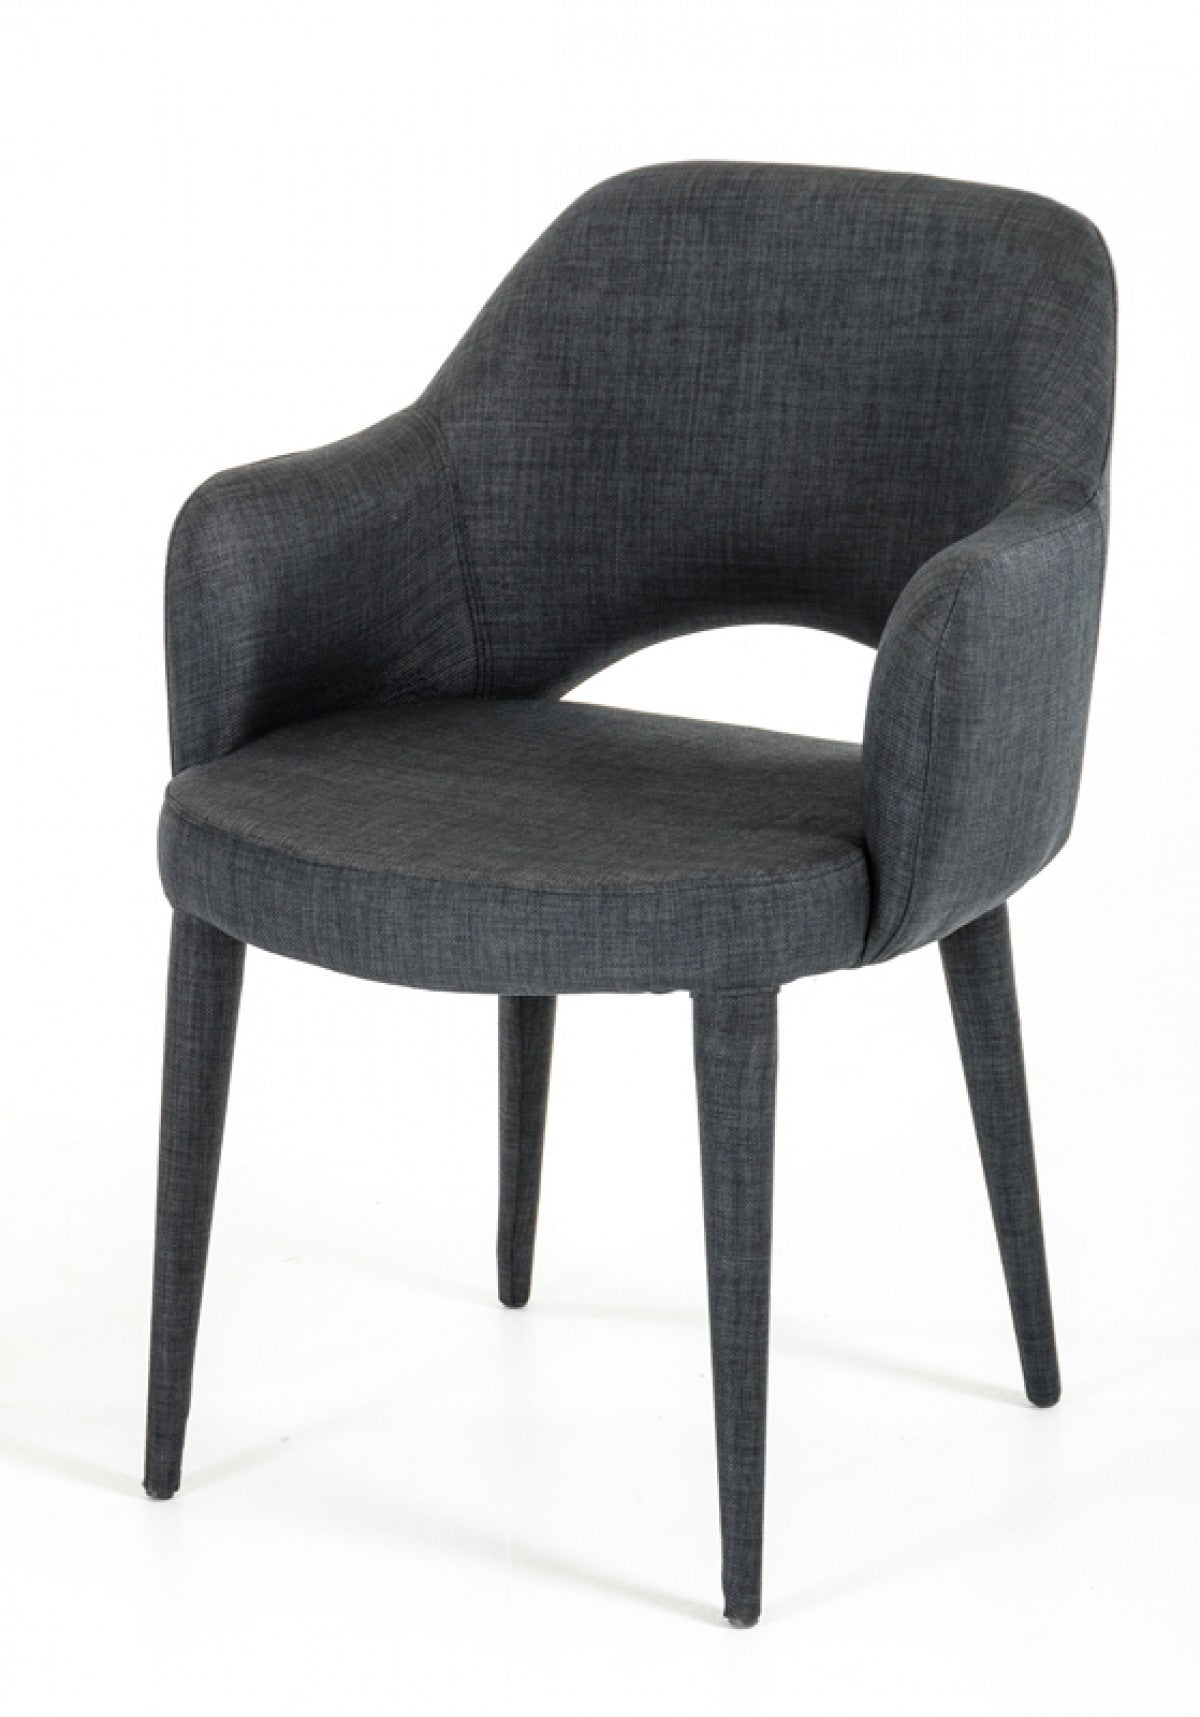 Williamette Dining Chair by VIG